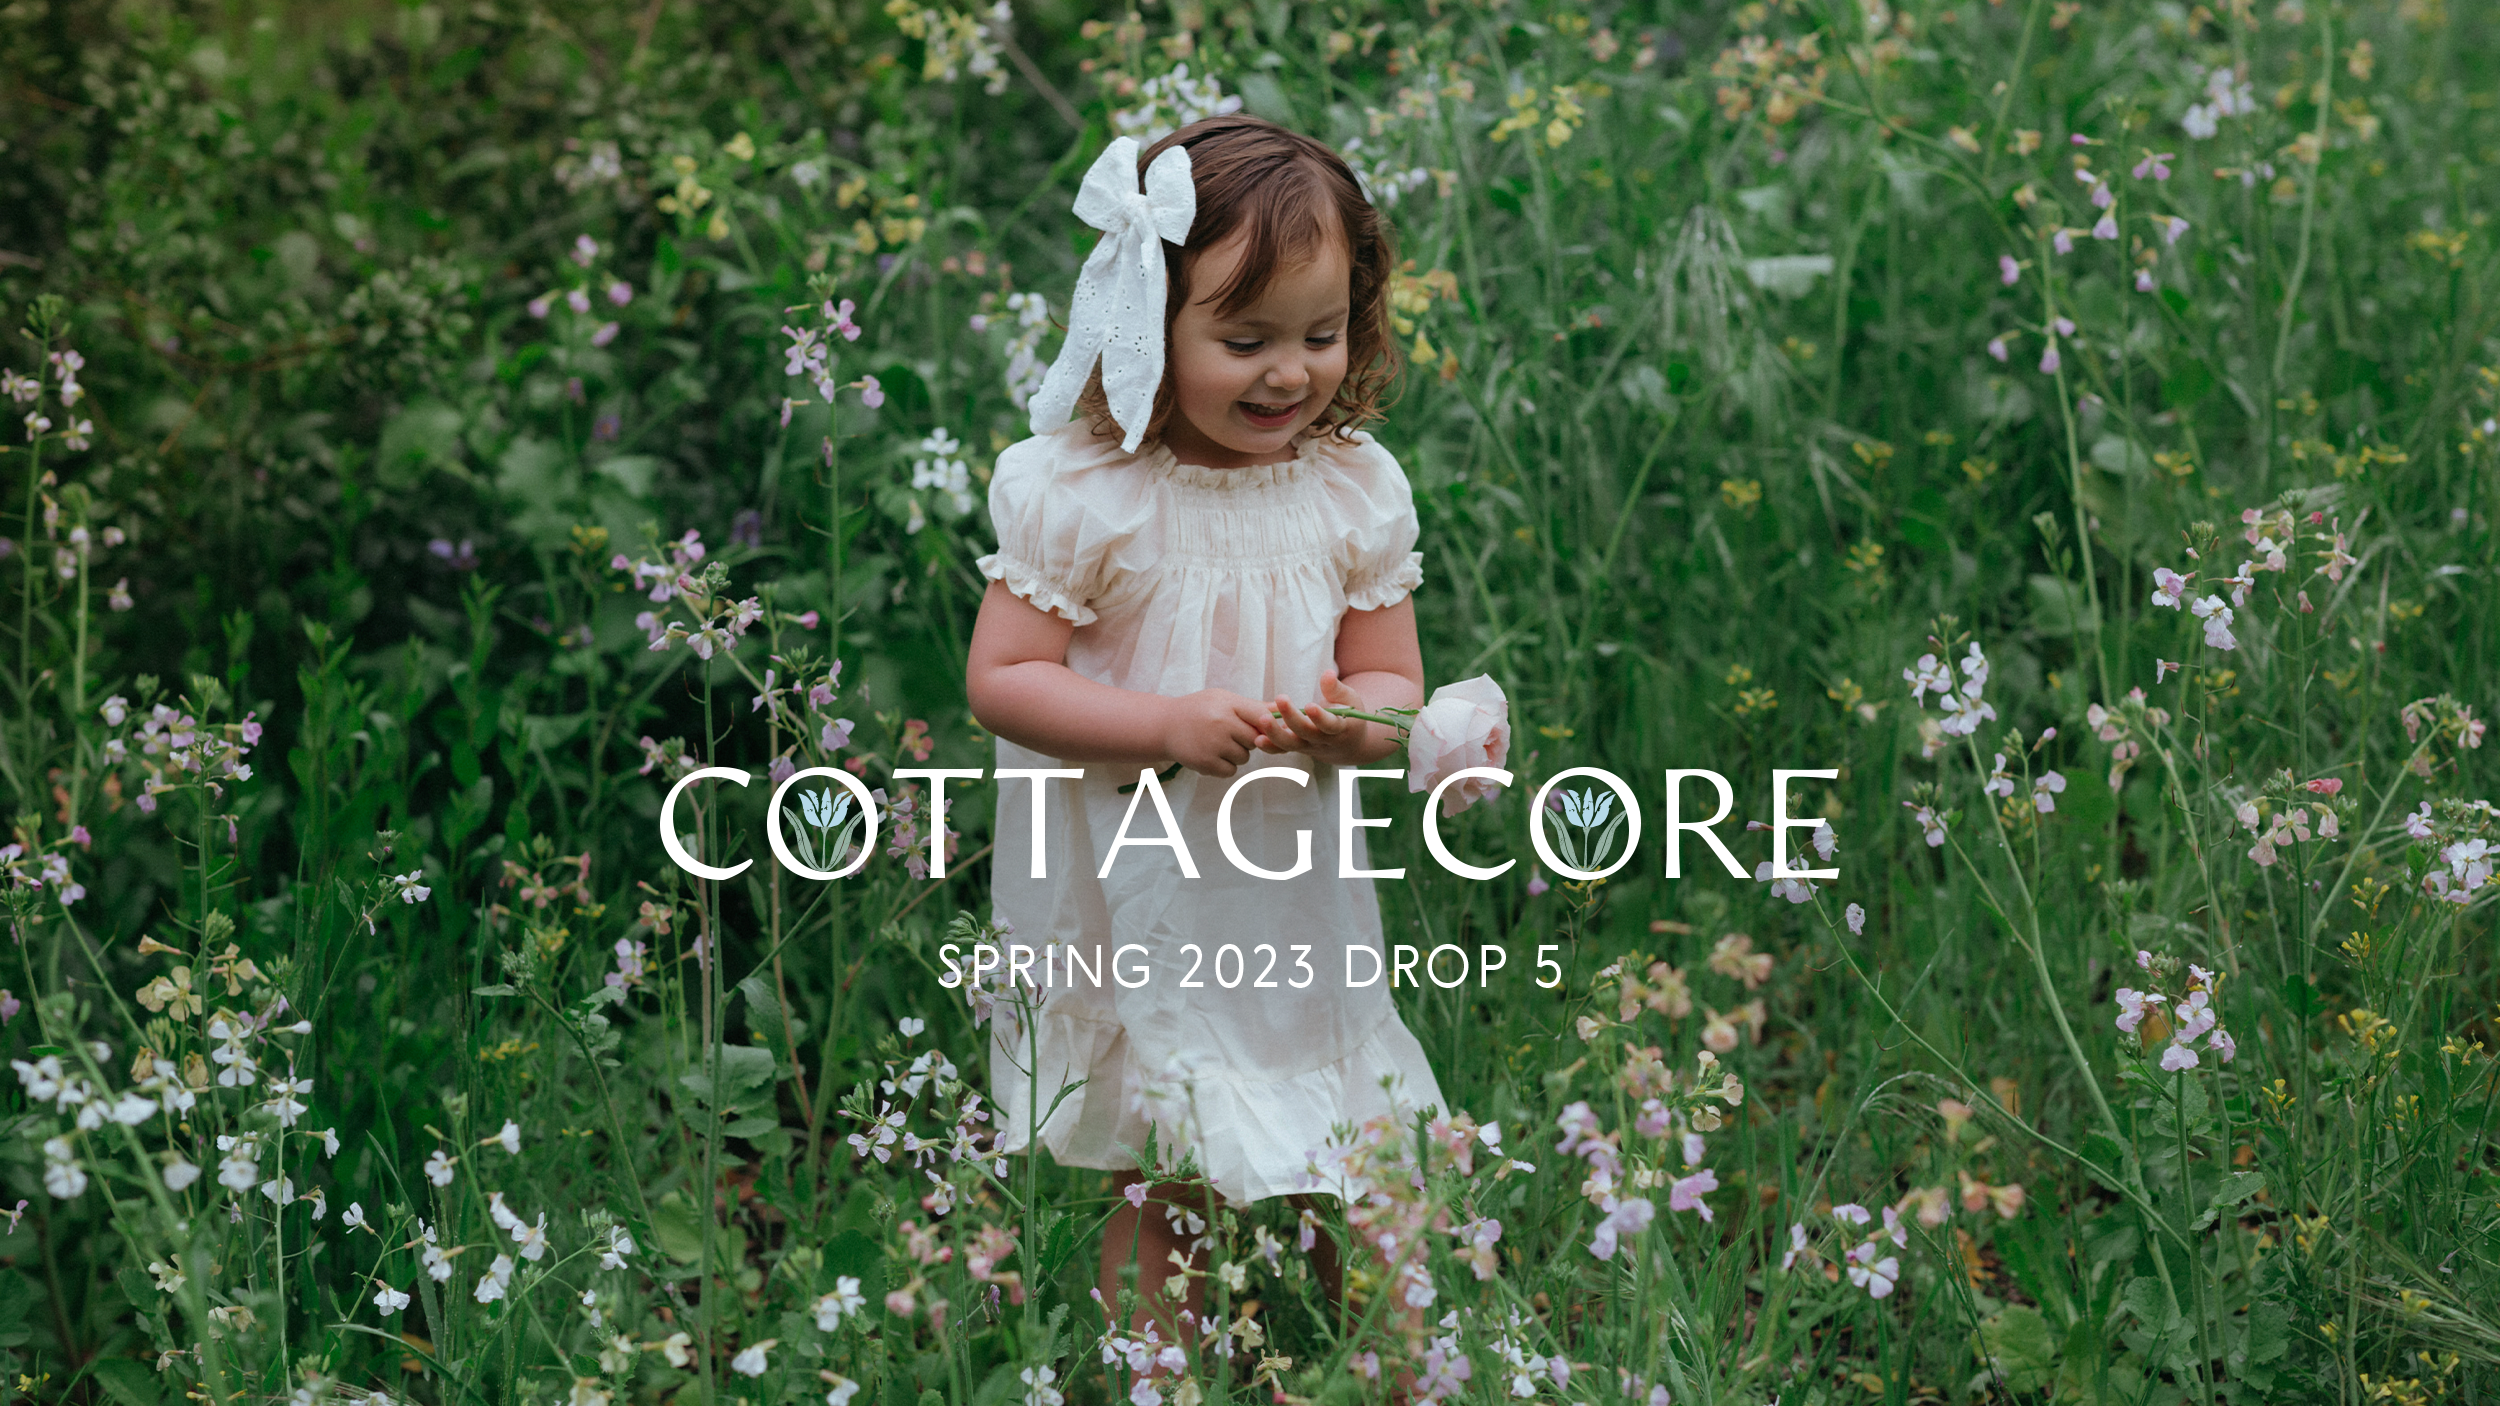 The dreamy Cottagecore Lookbook has arrived! 💫